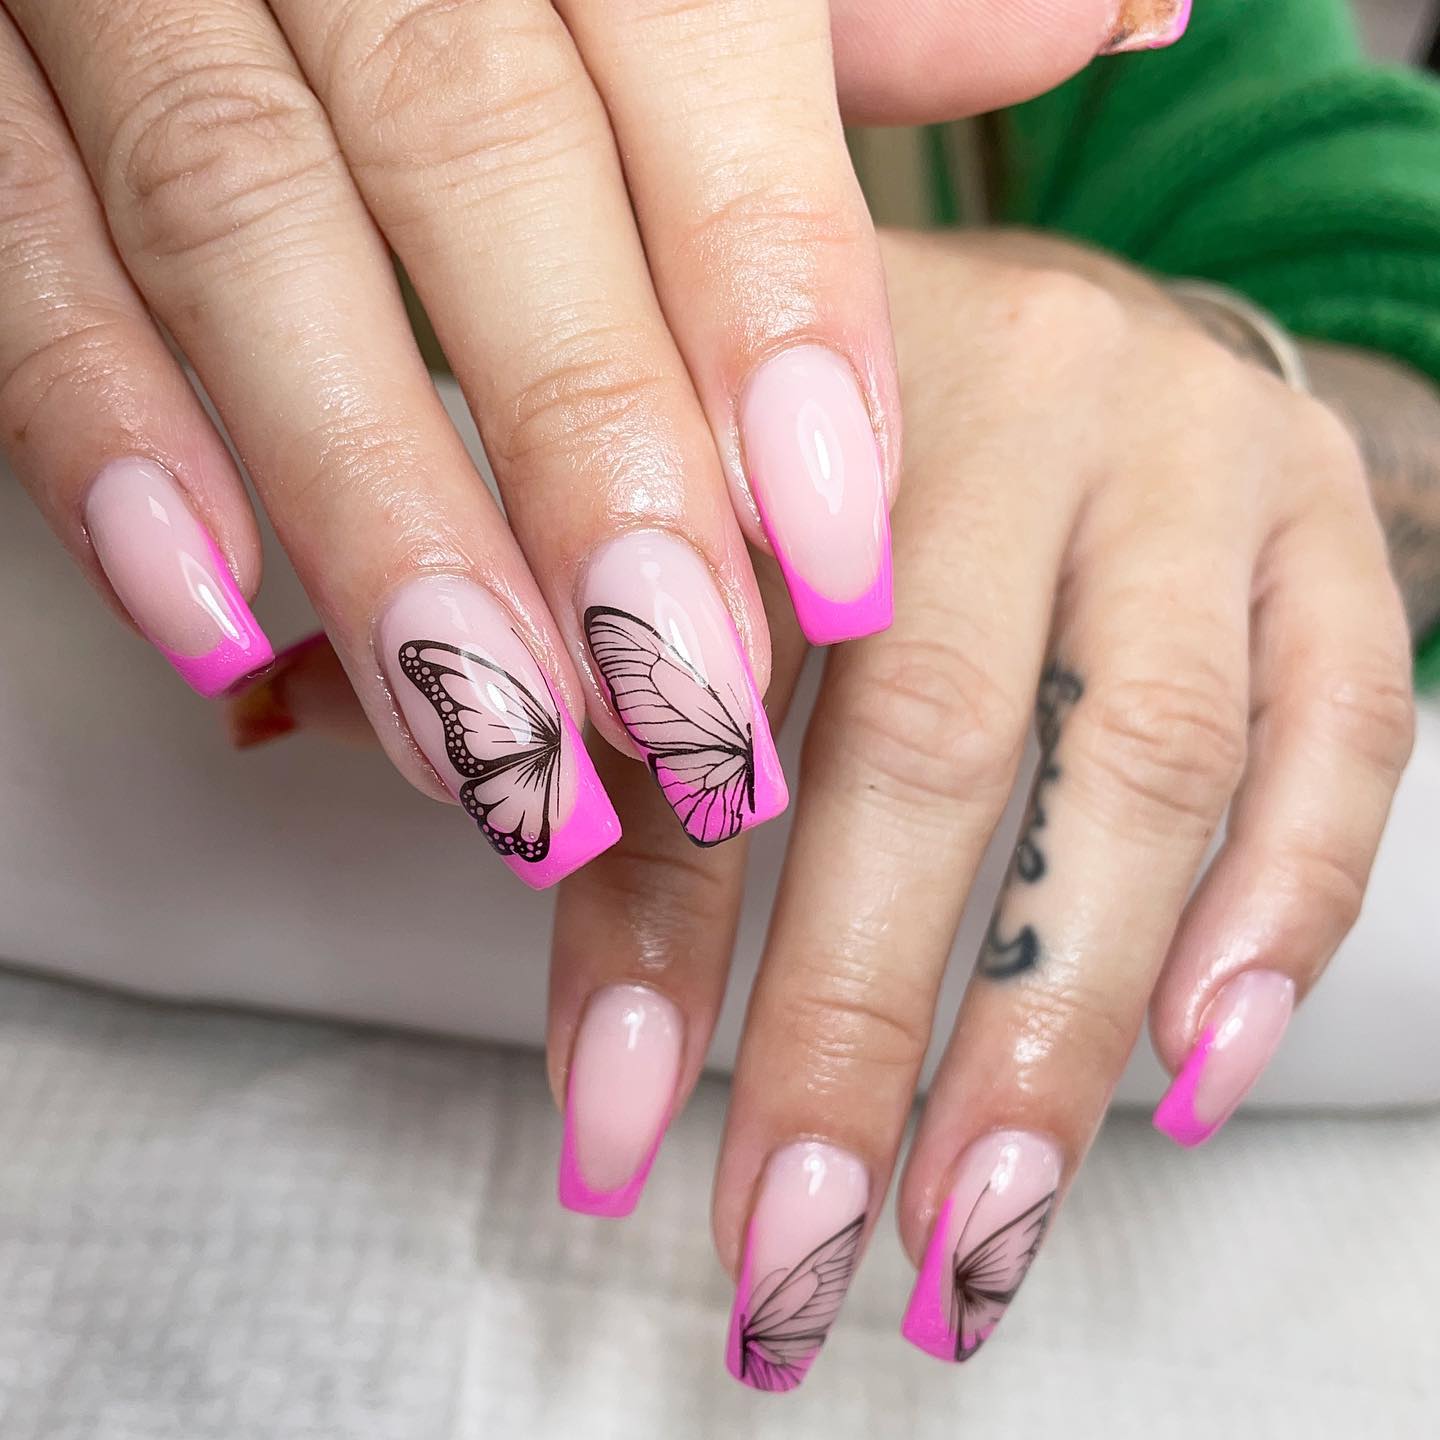 With your pink french mani and one wing butterflies, it is sure that you will feel the summer vibe on your nails.